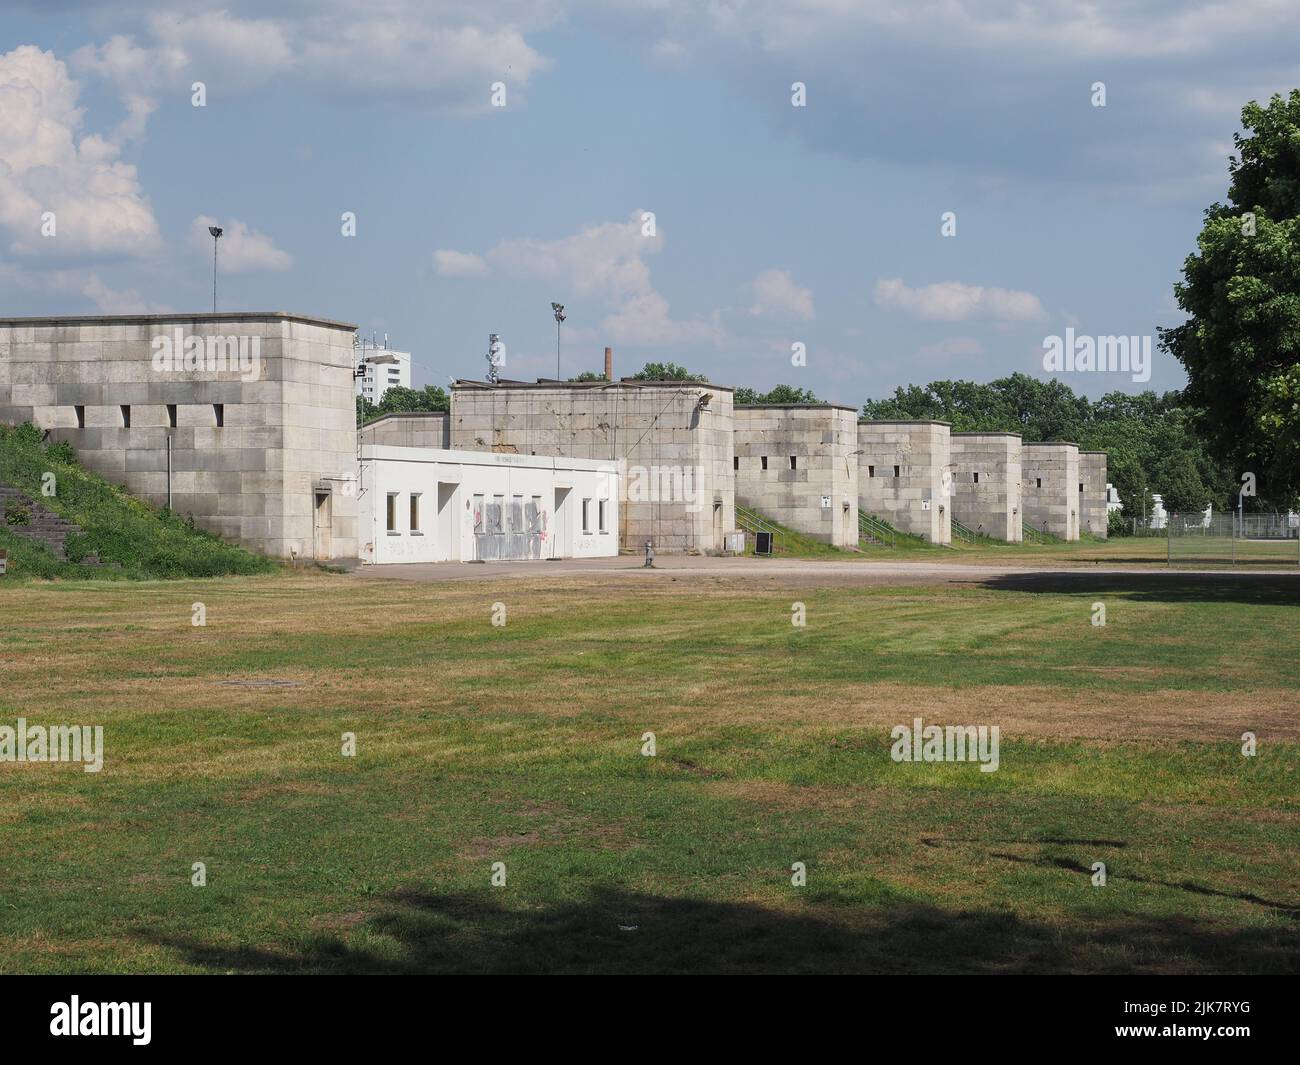 Zeppelinfeld translation Zeppelin Field designed by architect Albert Speer as part of the Nazi party rally ground in Nuernberg, Germany Stock Photo